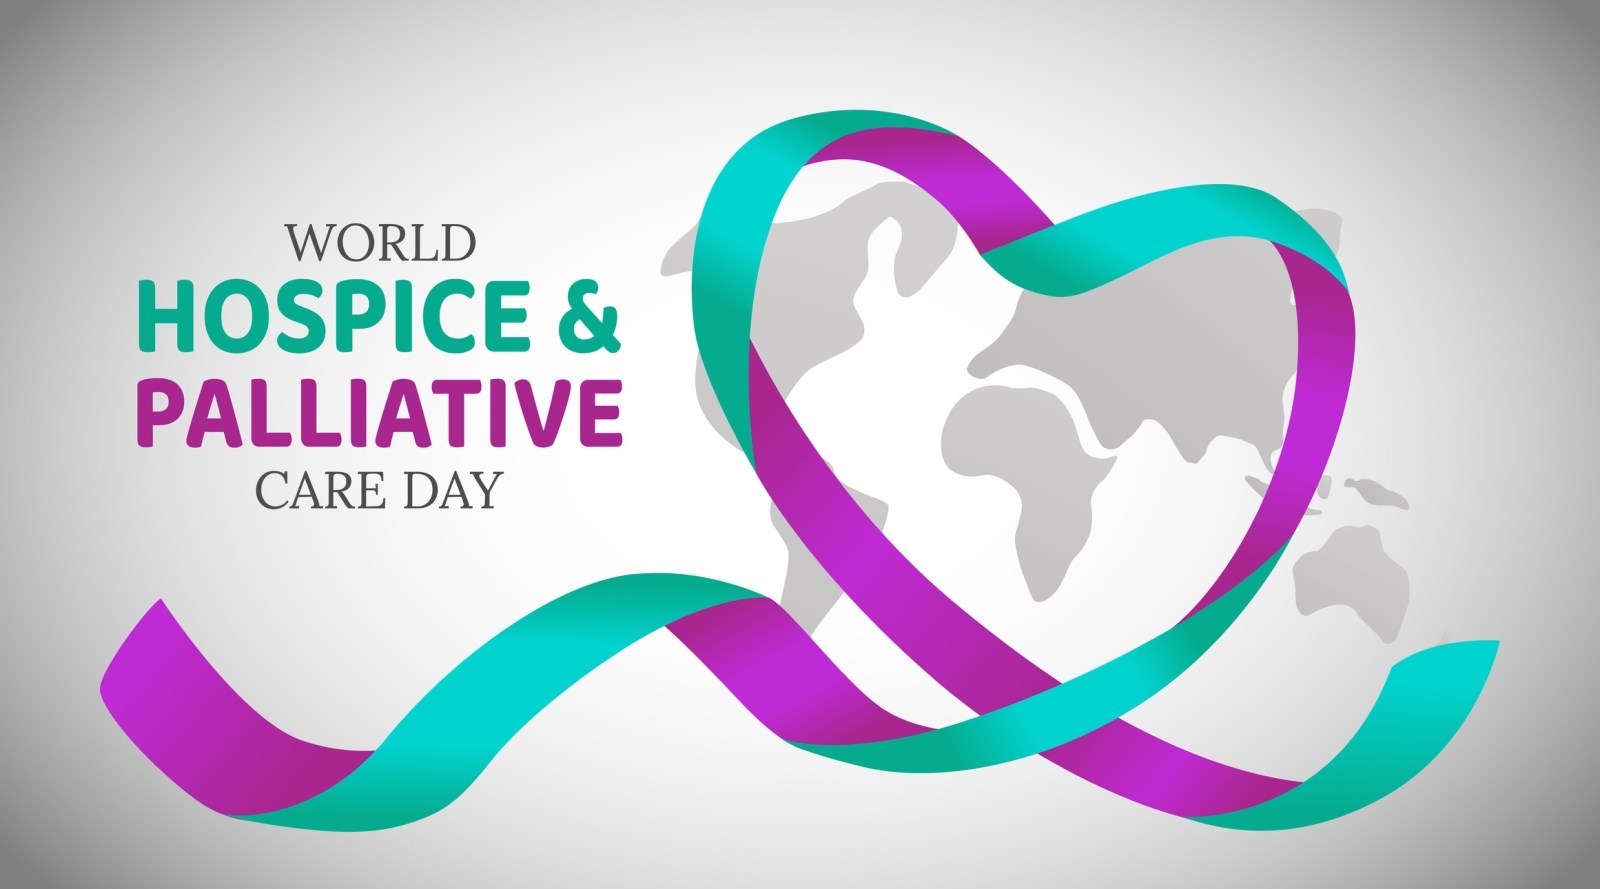 World Hospice and Palliative Day